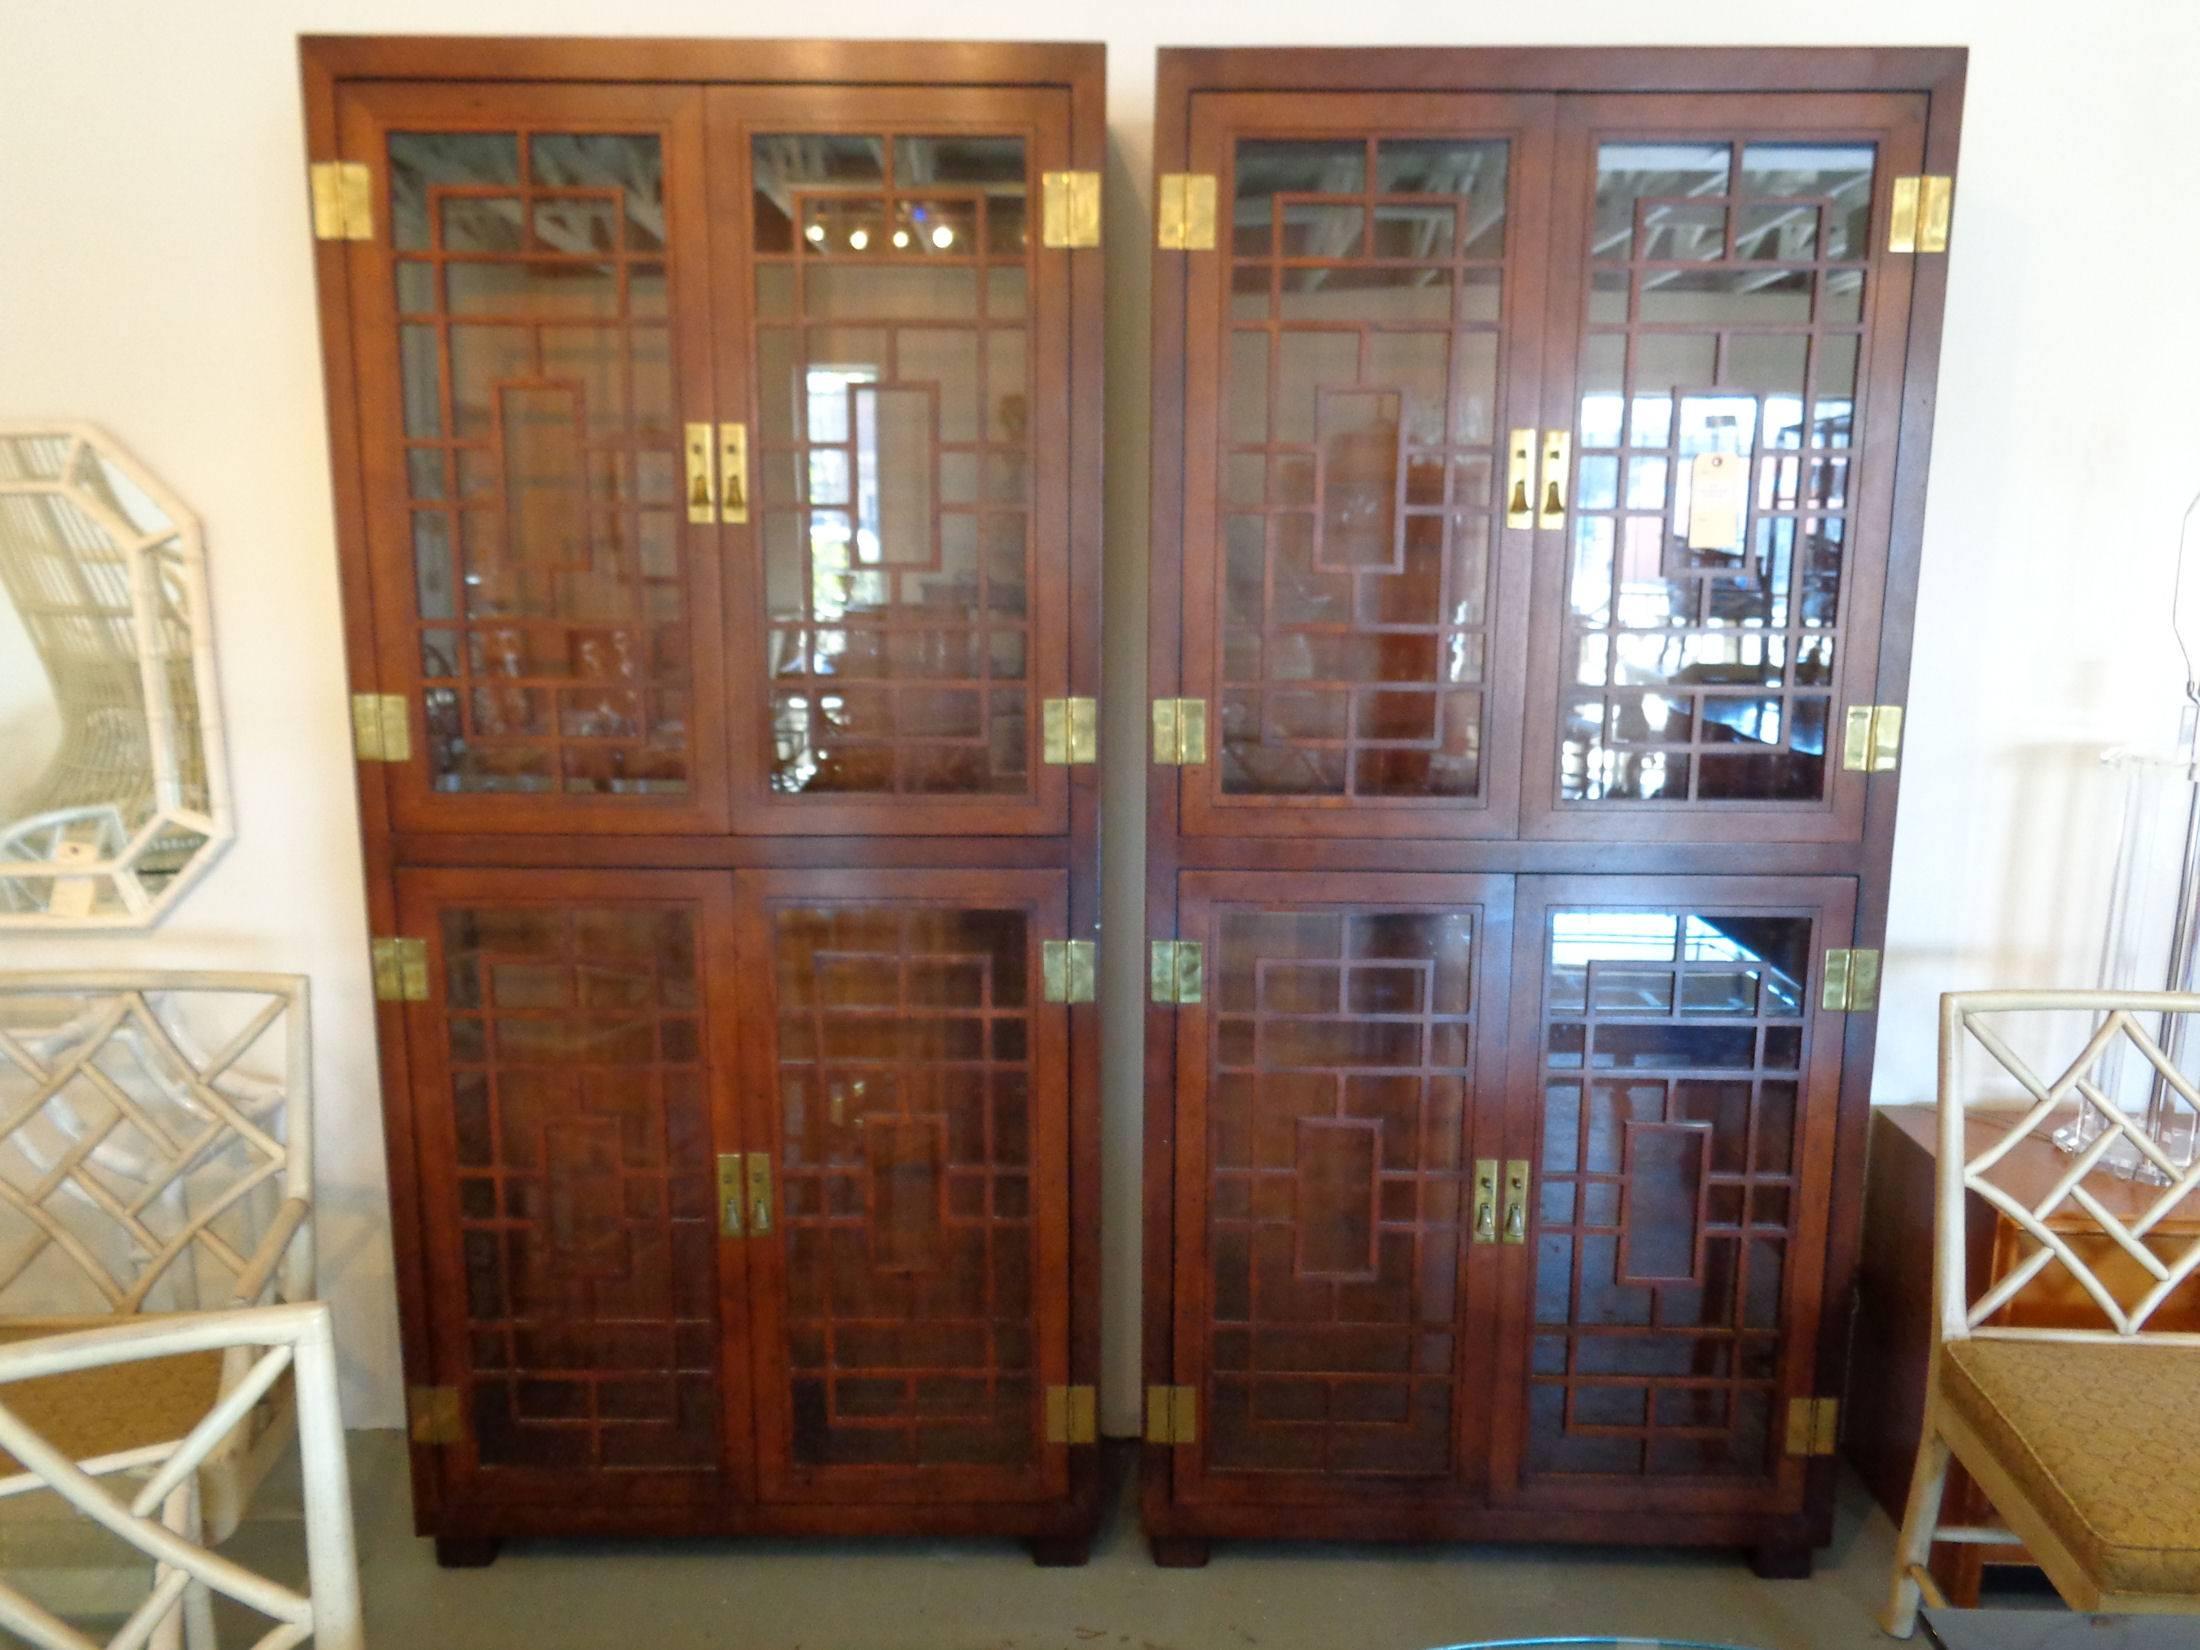 Pair of fretwork cabinets by Henredon in nice as found vintage condition. There are scuffs and scrapes to the as found finish and patina to the hardware. Cabinets have glass shelves and original interior lighting.